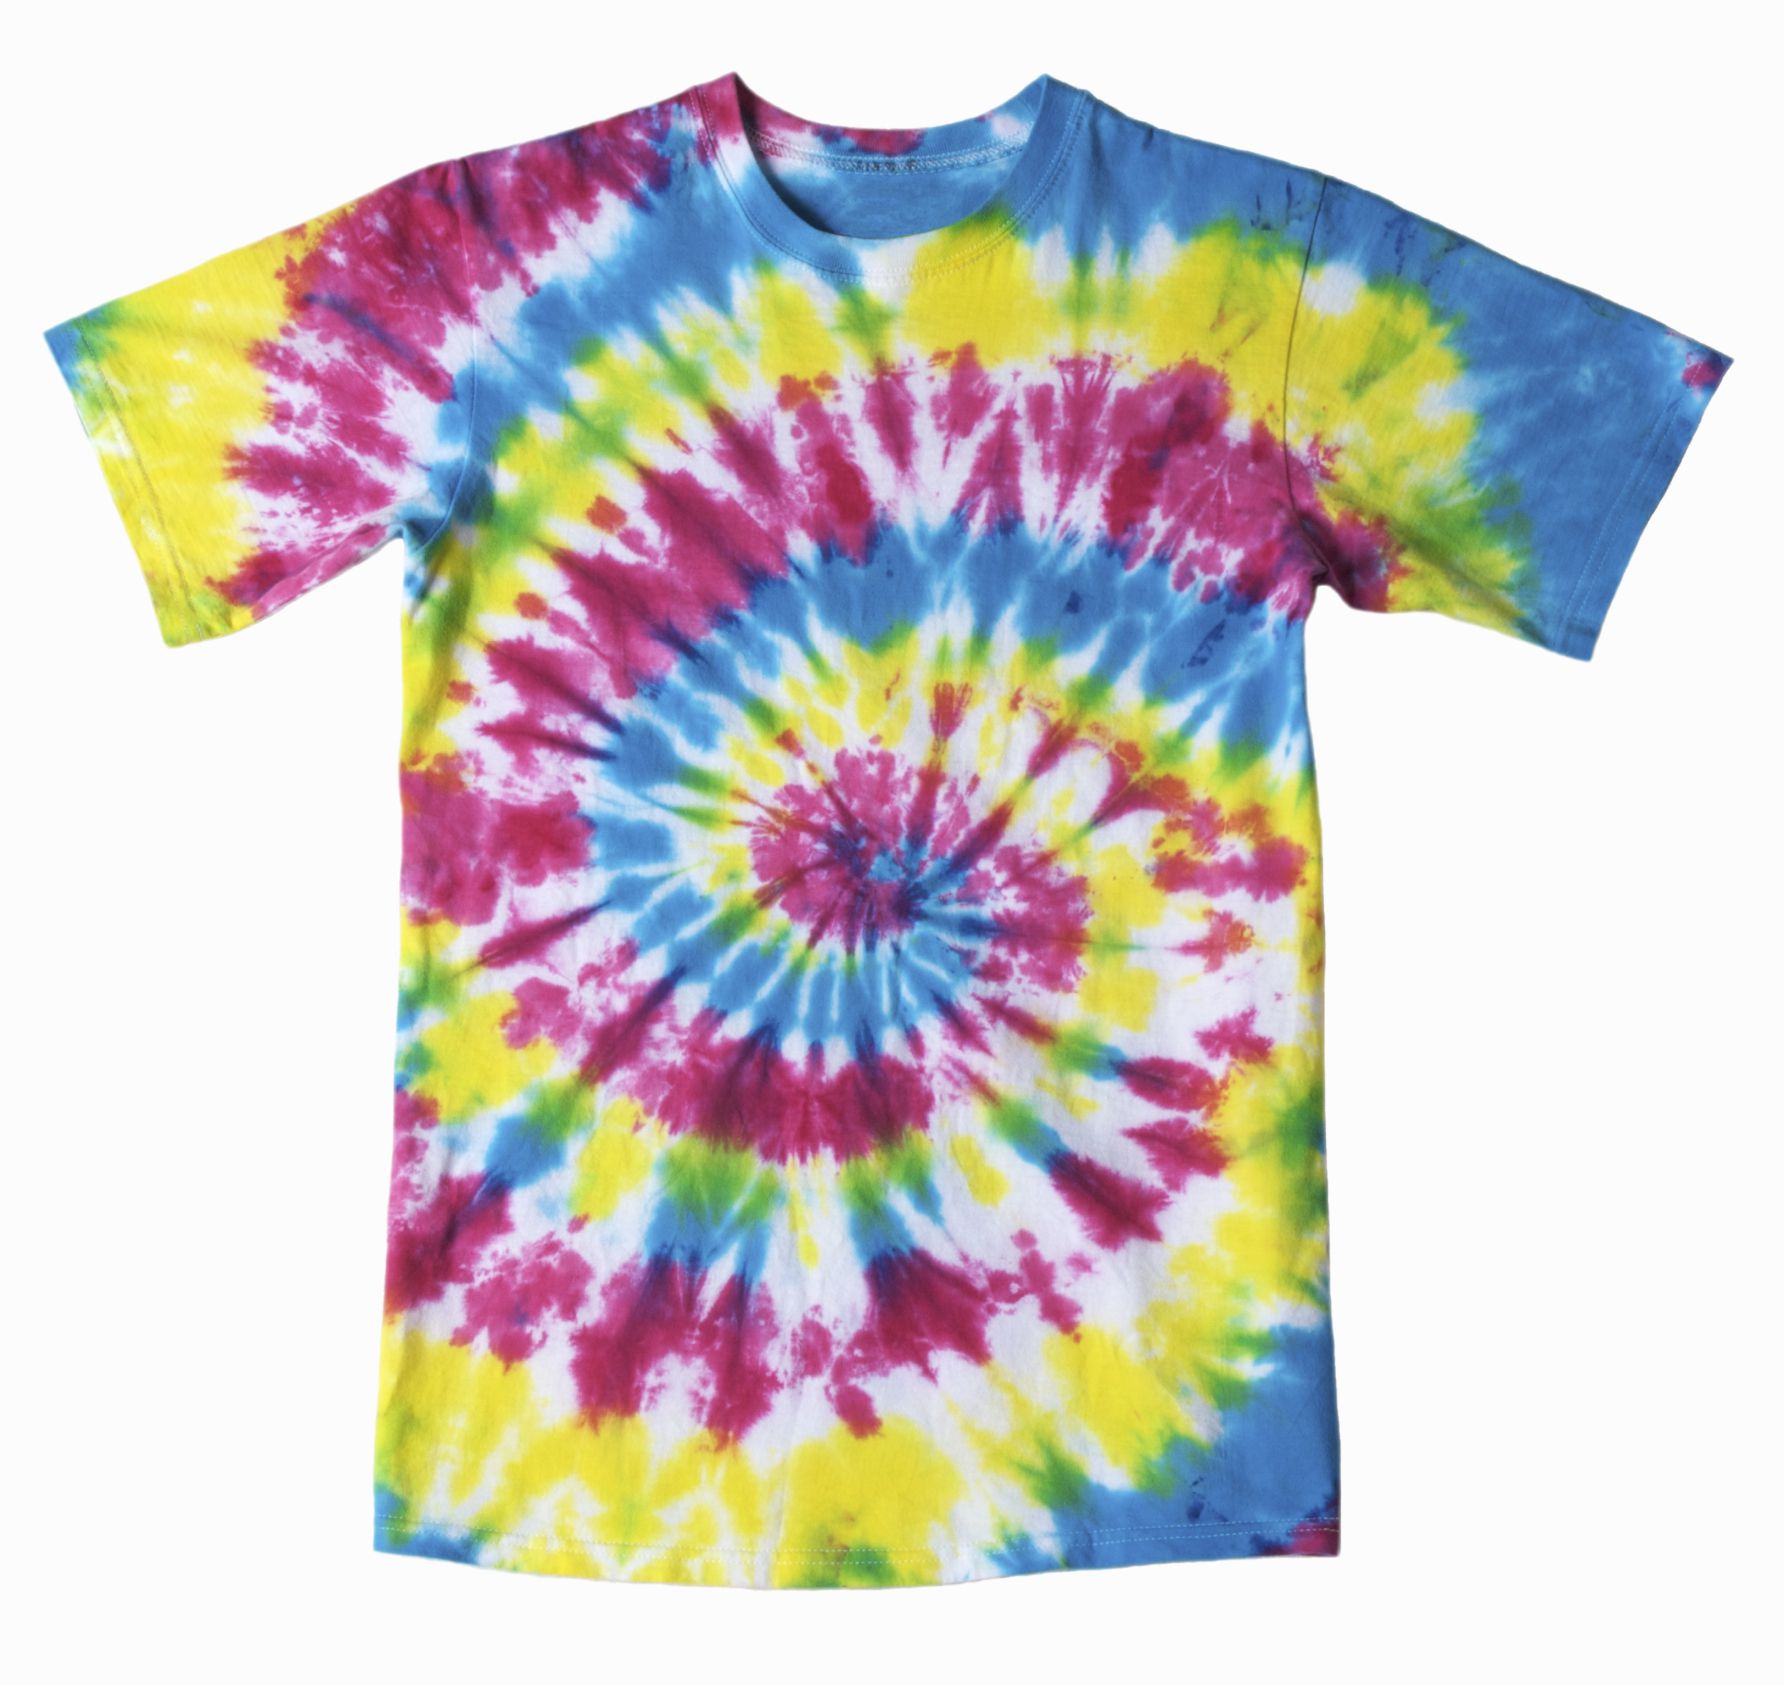 How to Make a Spiral Tie-Dye T-Shirt